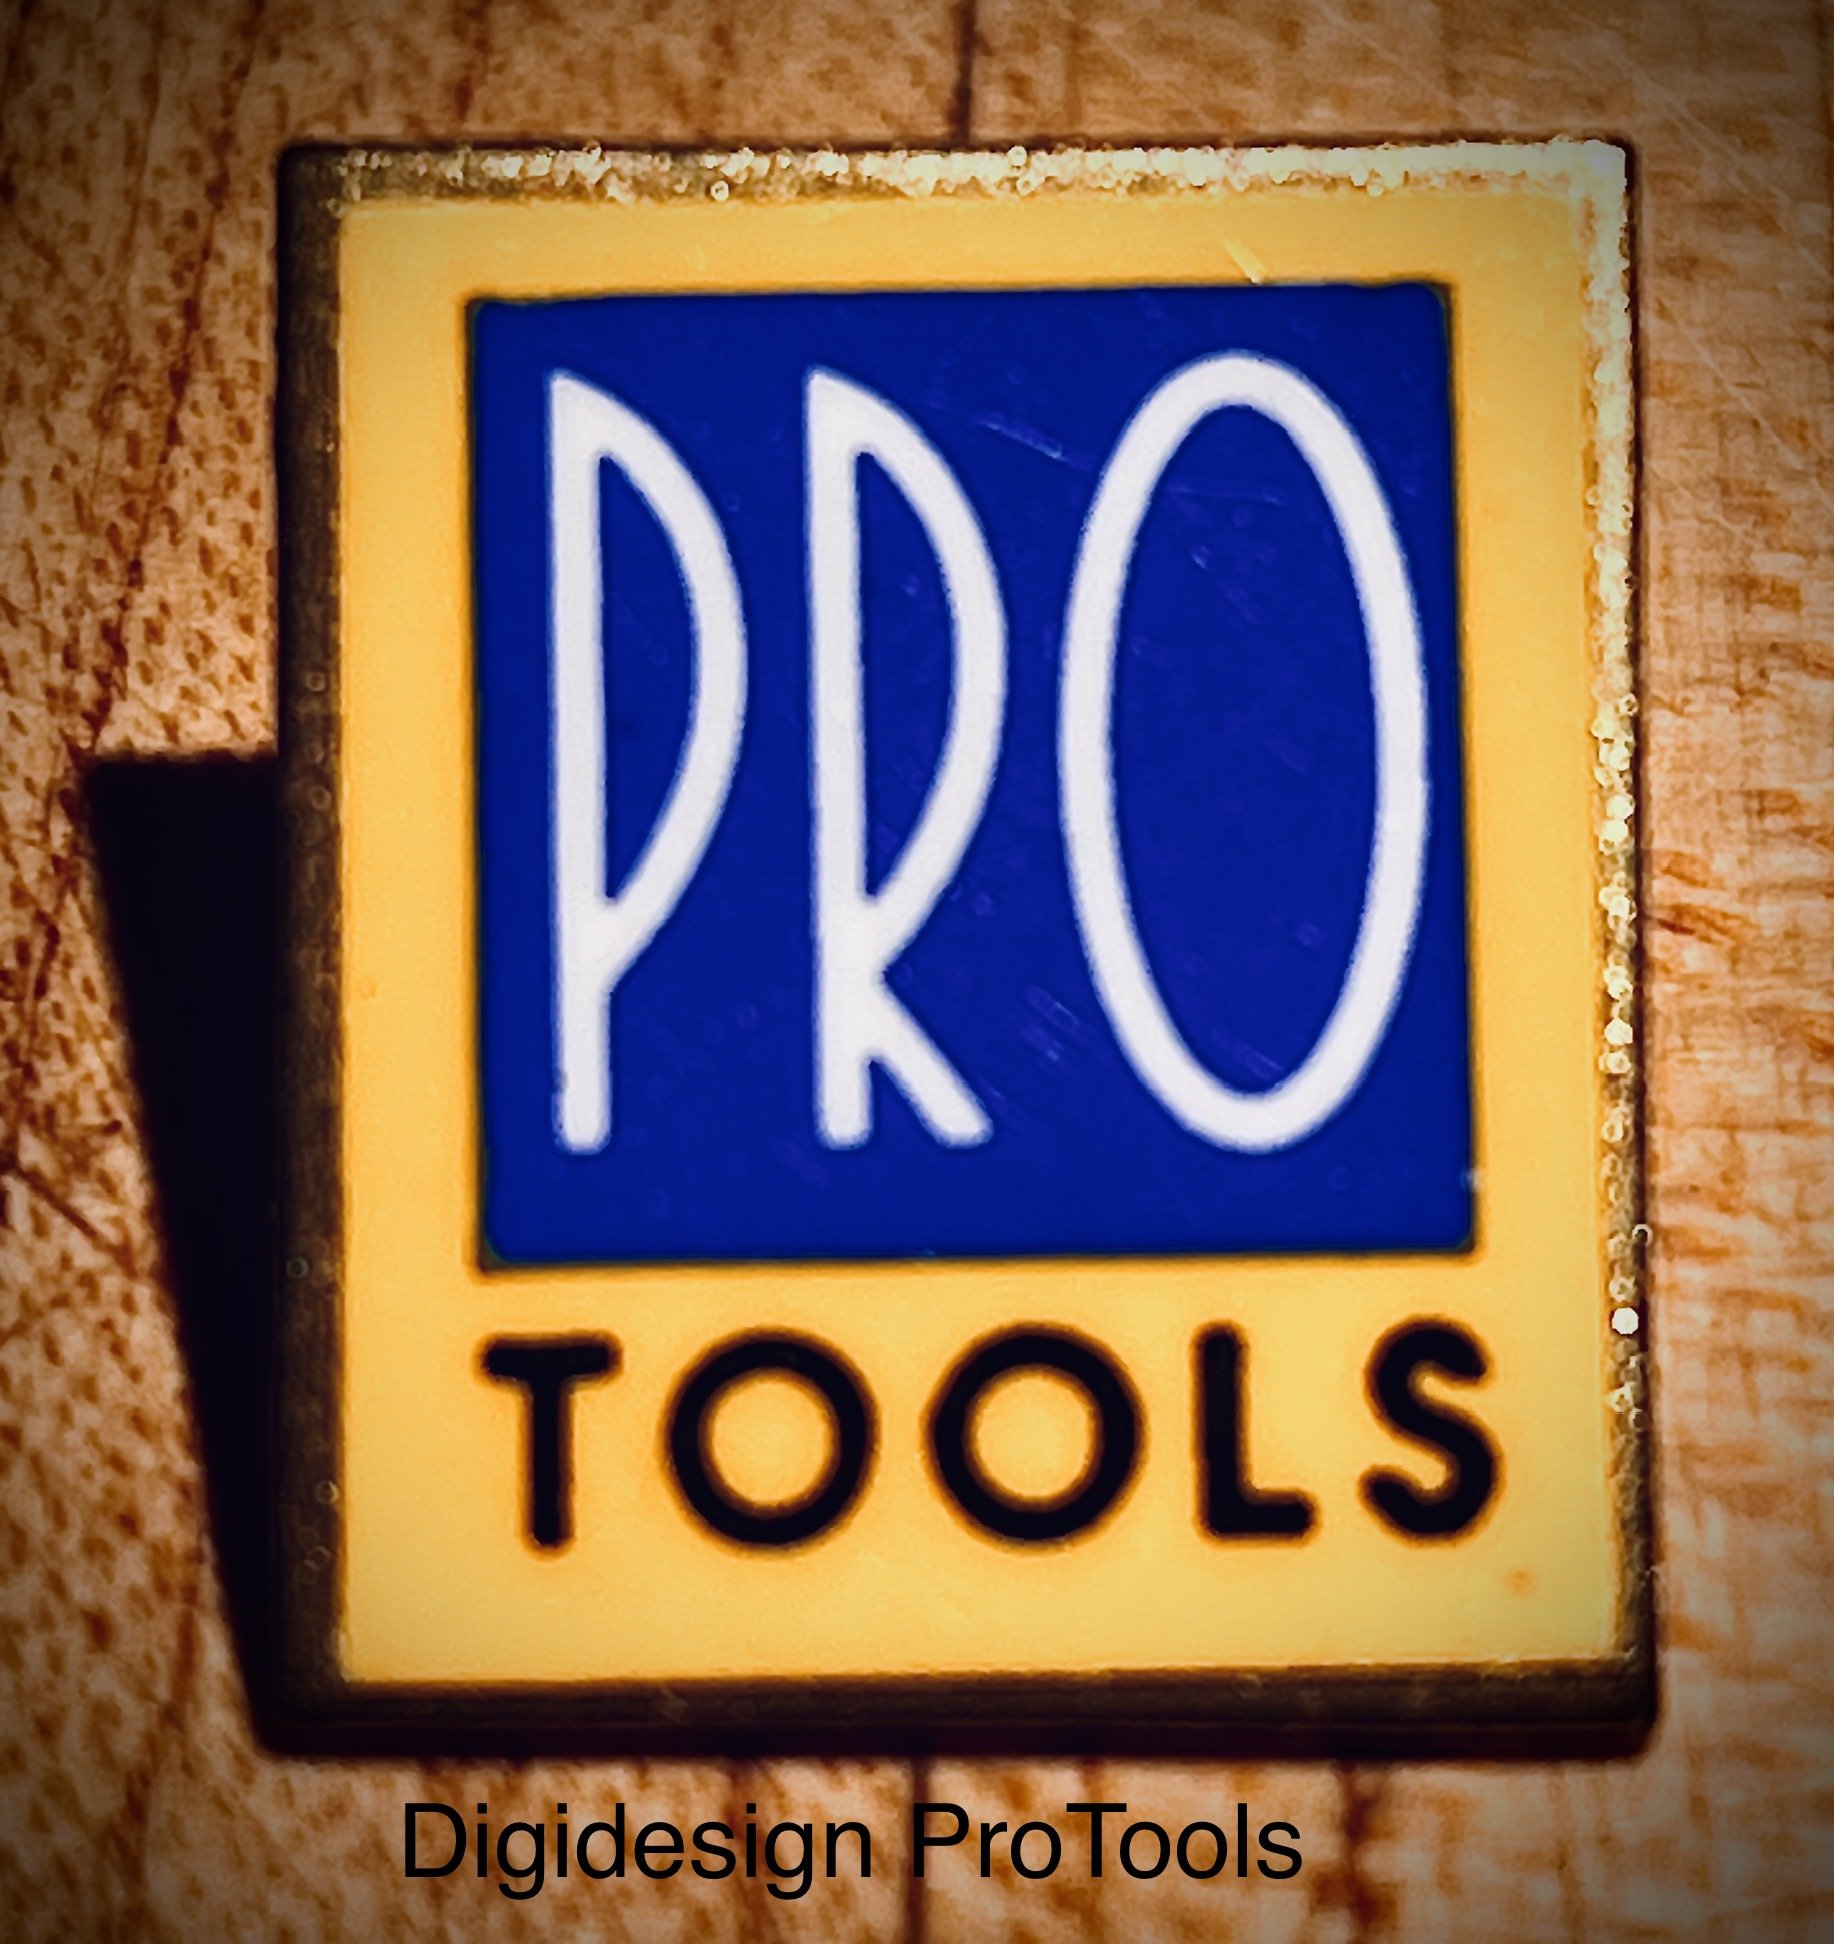 1985 Promotional Pin for Digidesign's ProTools